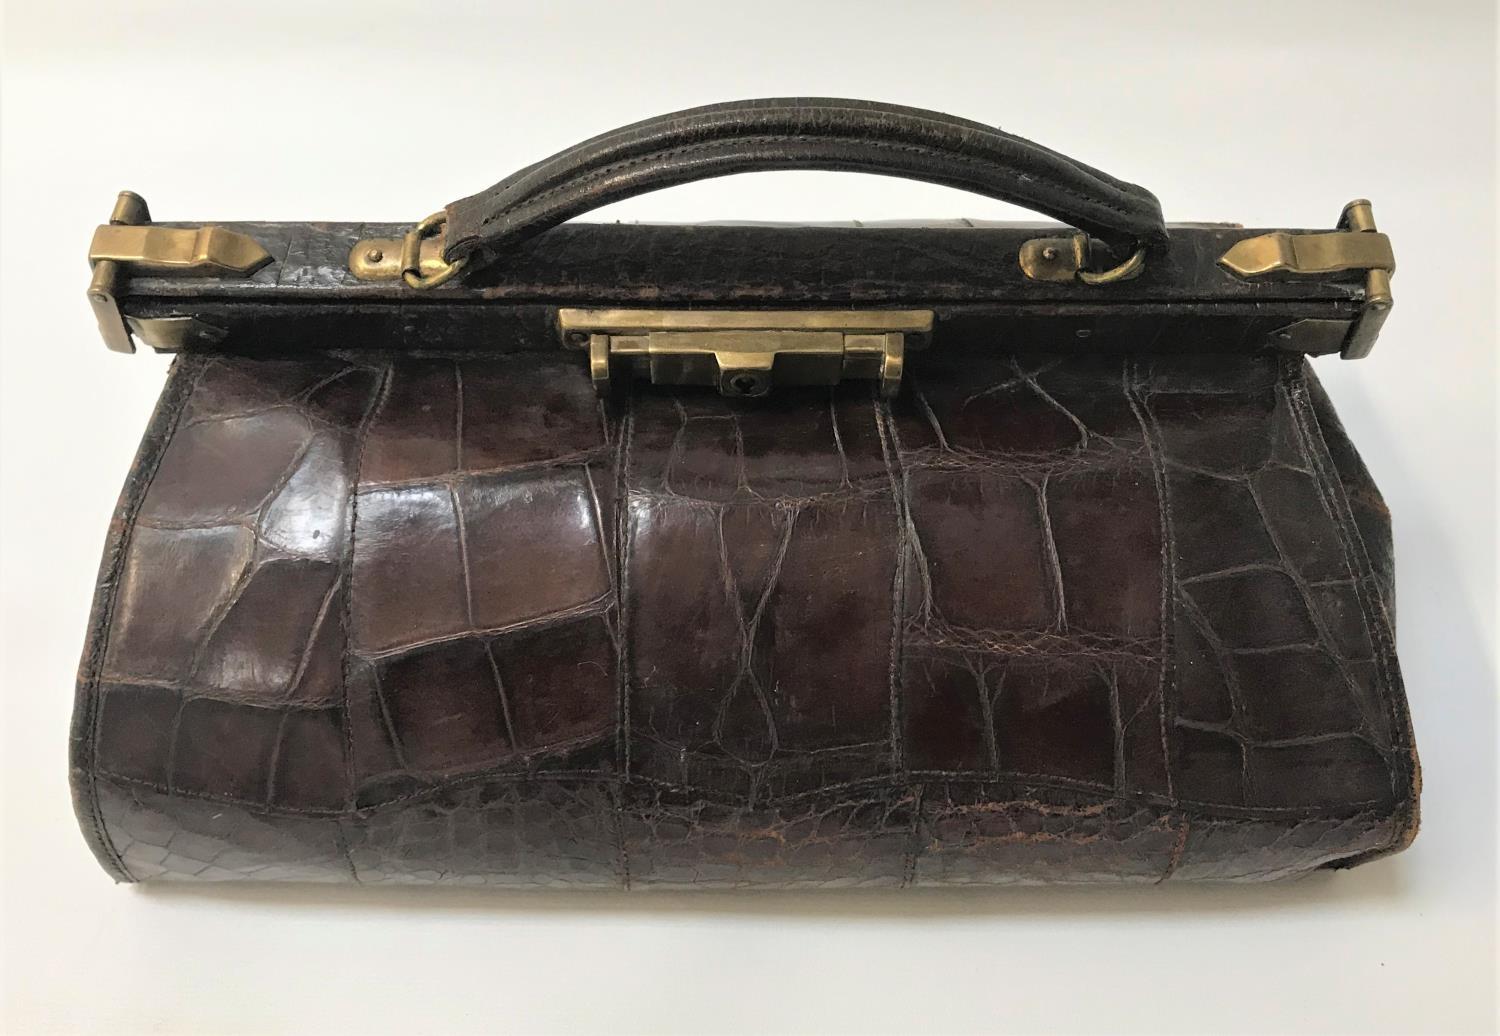 LADIES CROCODILE GLADSTONE BAG with a brass lock and closures, the interior with a mirror pocket and